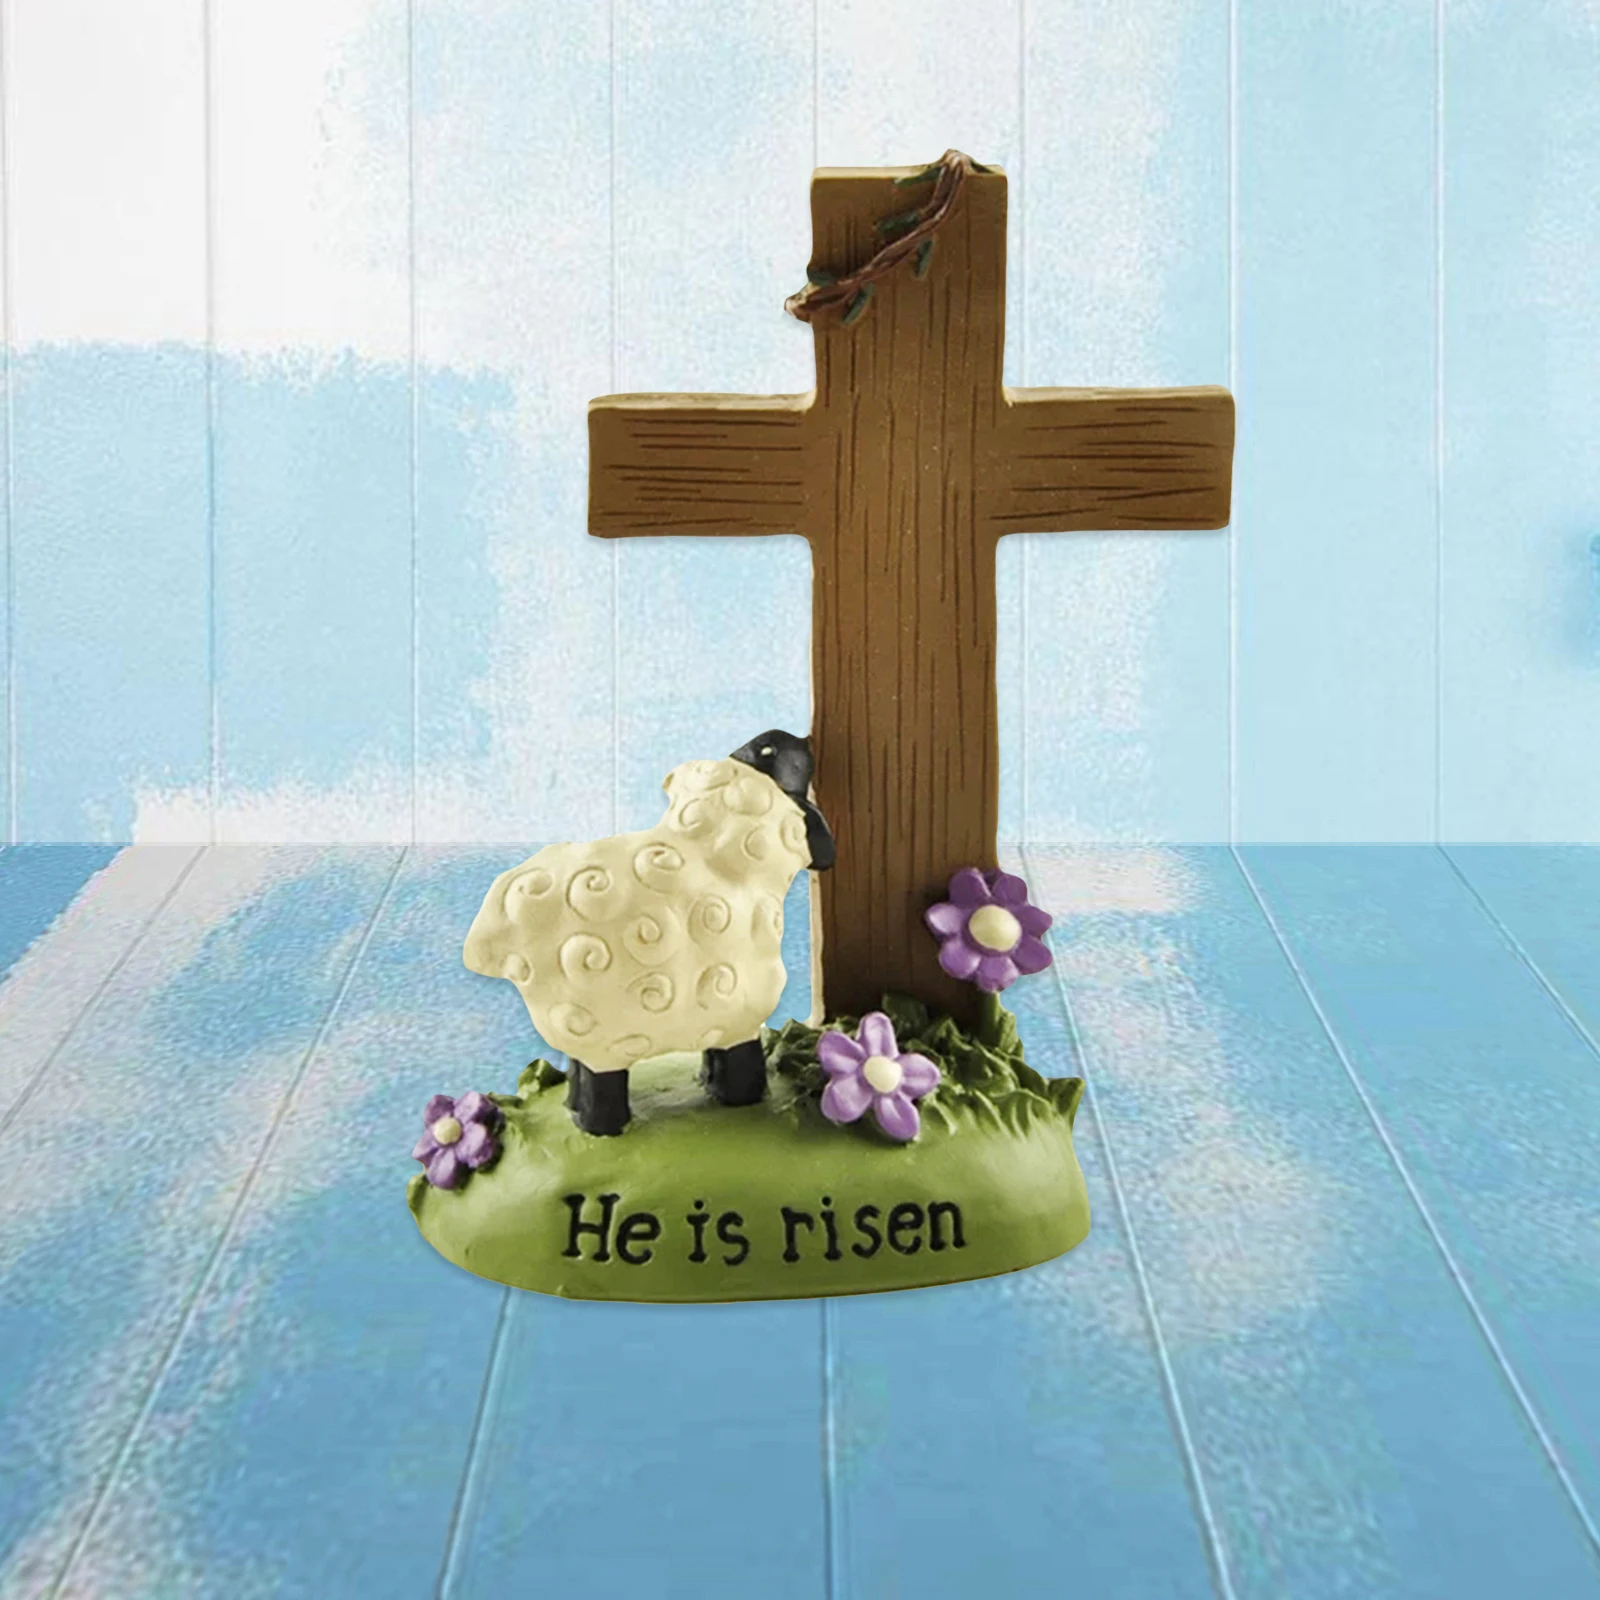 Resin Church Cross Decorative Ornaments Cross Decor Christian Gift Handcrafted Resin for Belivers